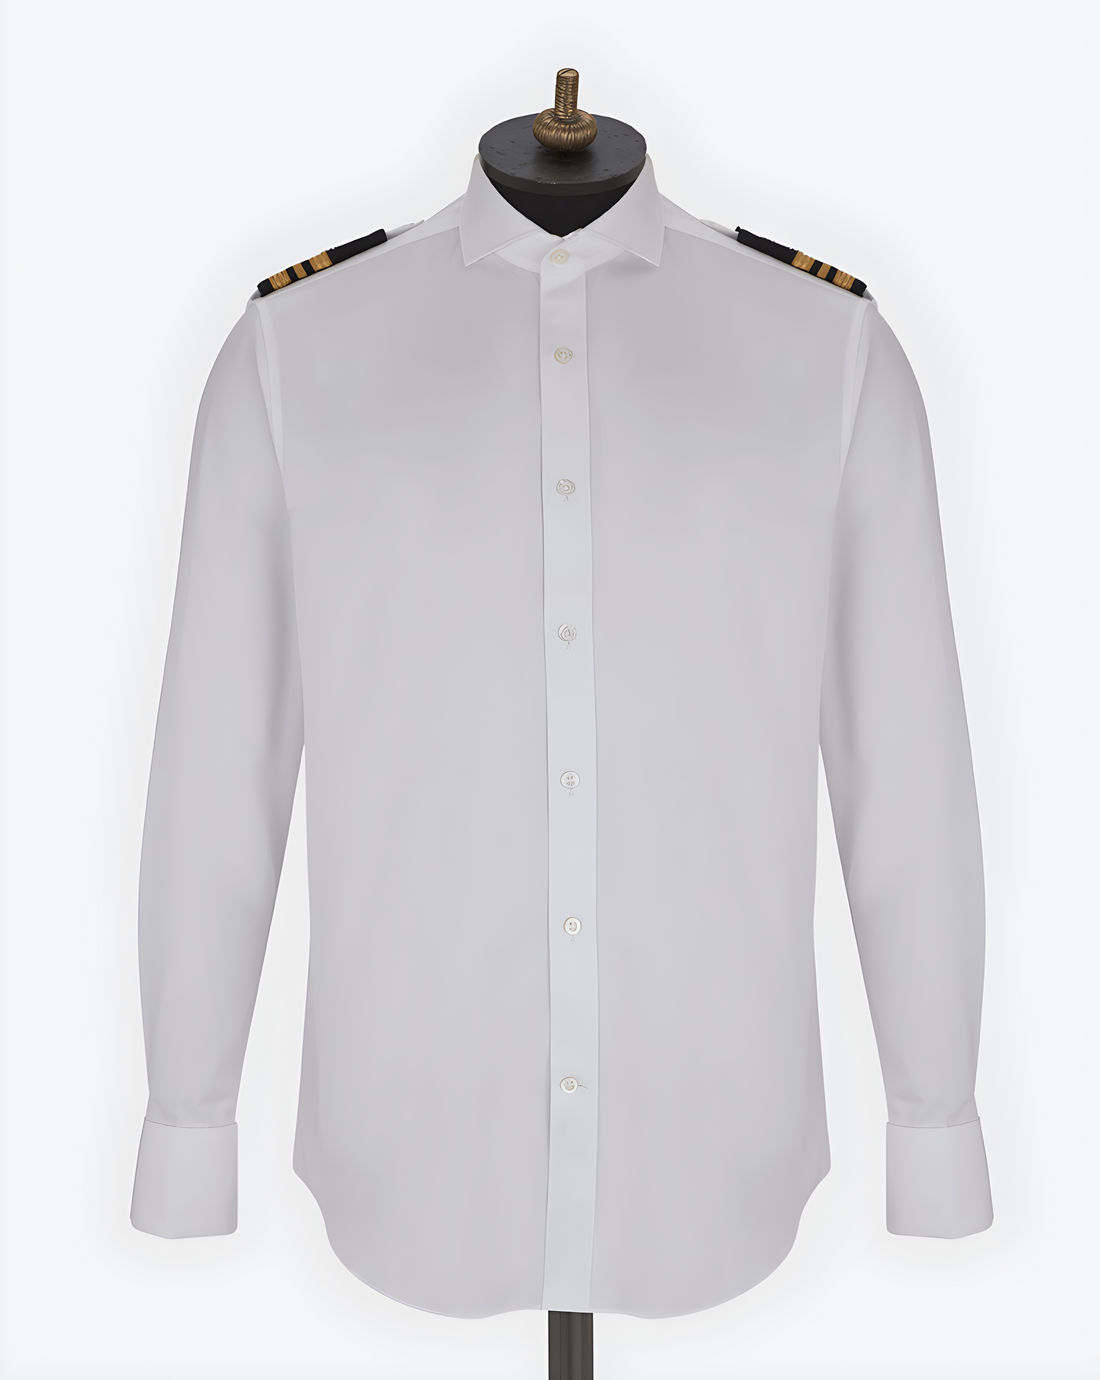 Naval No.1s Shirt - Classic Fit Long Sleeve